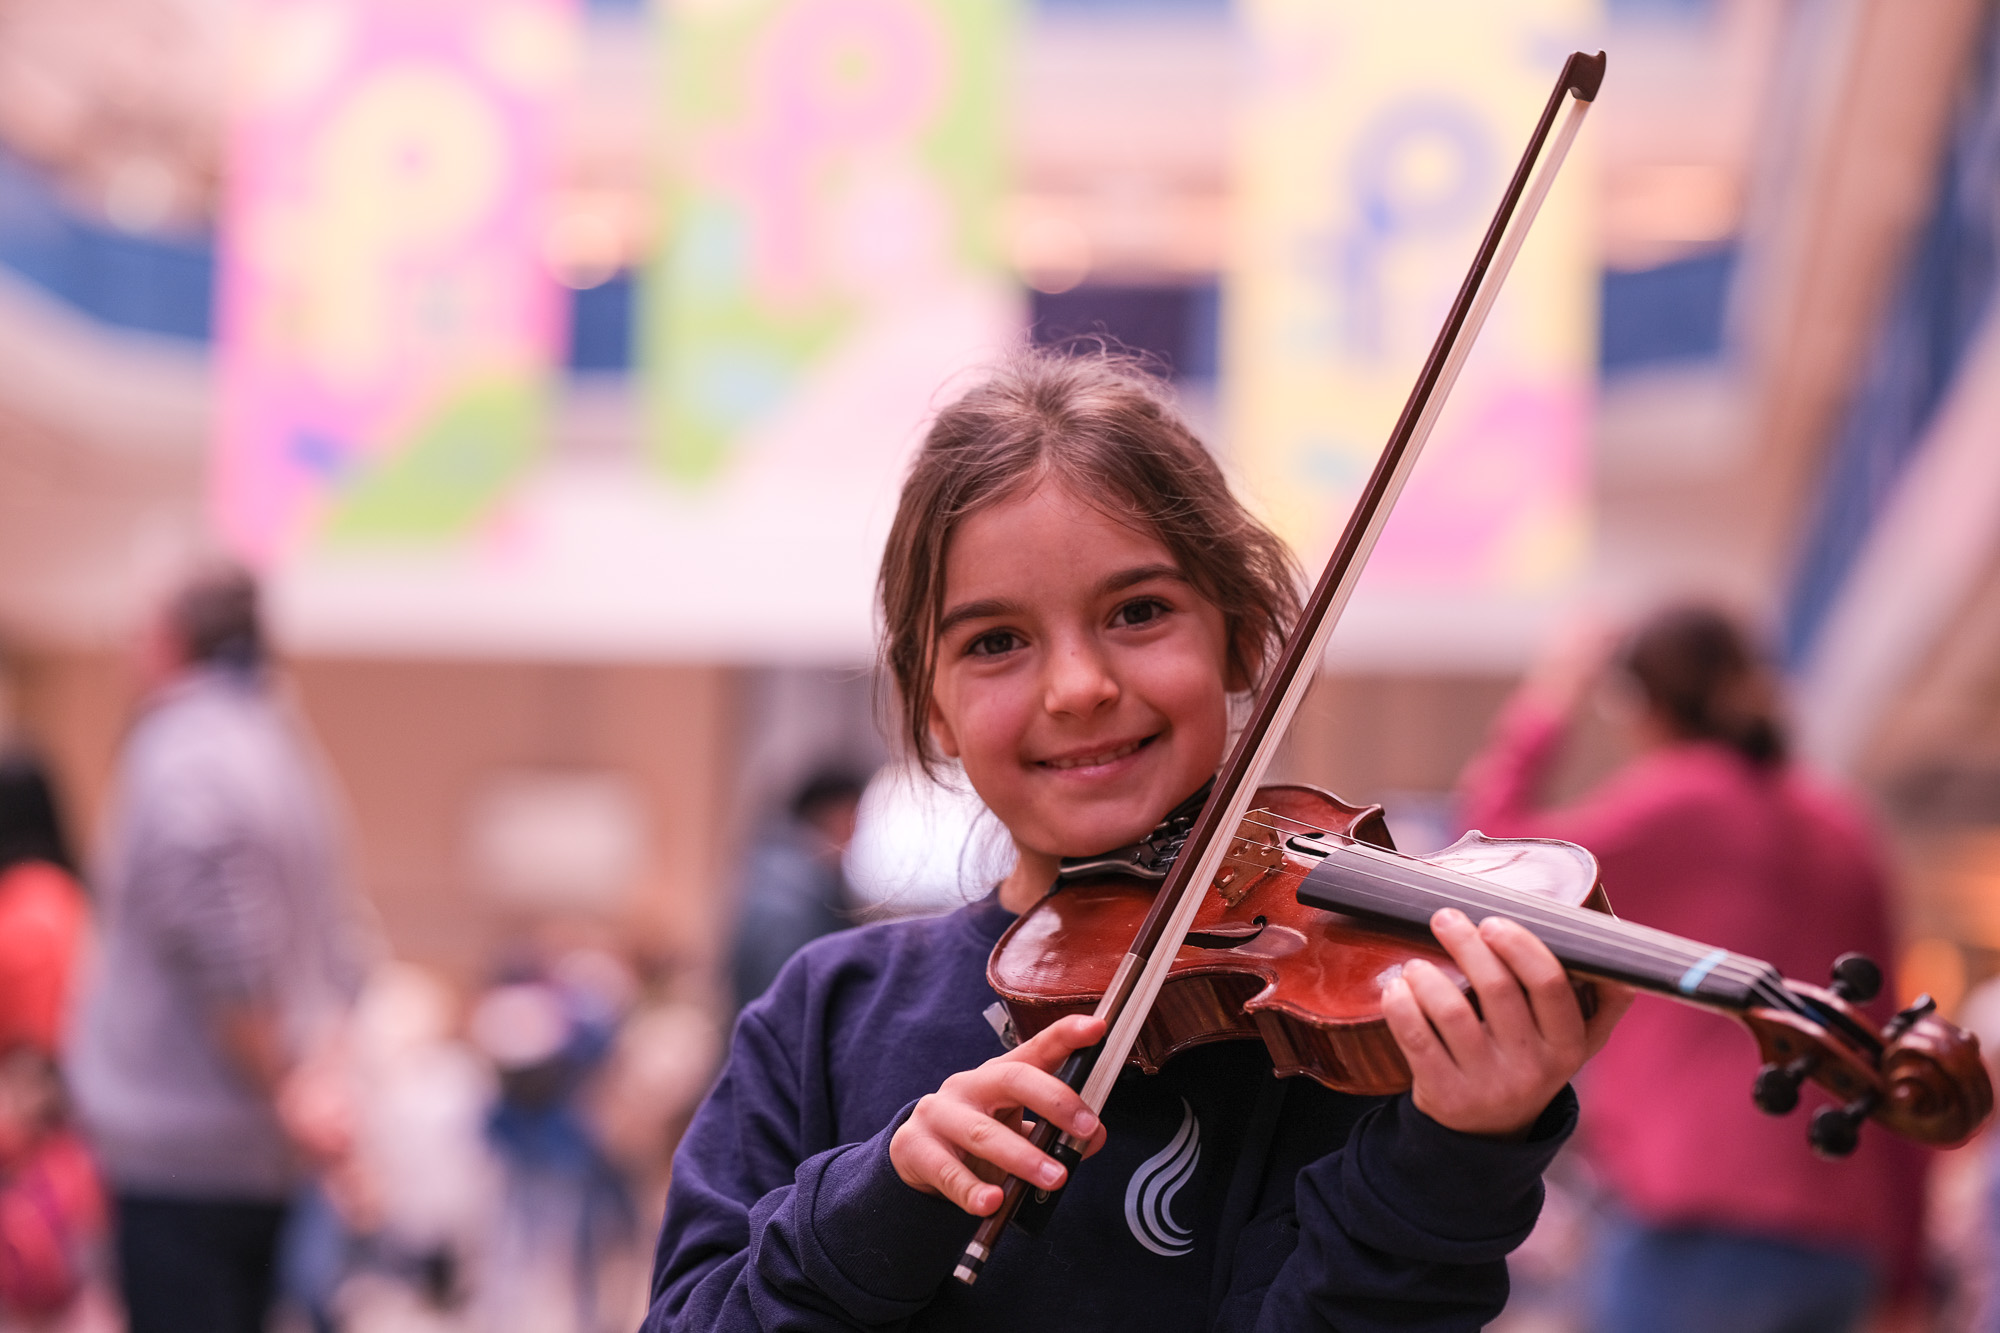 A girl from the social music project C.O.N.SONANZA looks into the camera with her violin, smiling. The violin bow is ready.